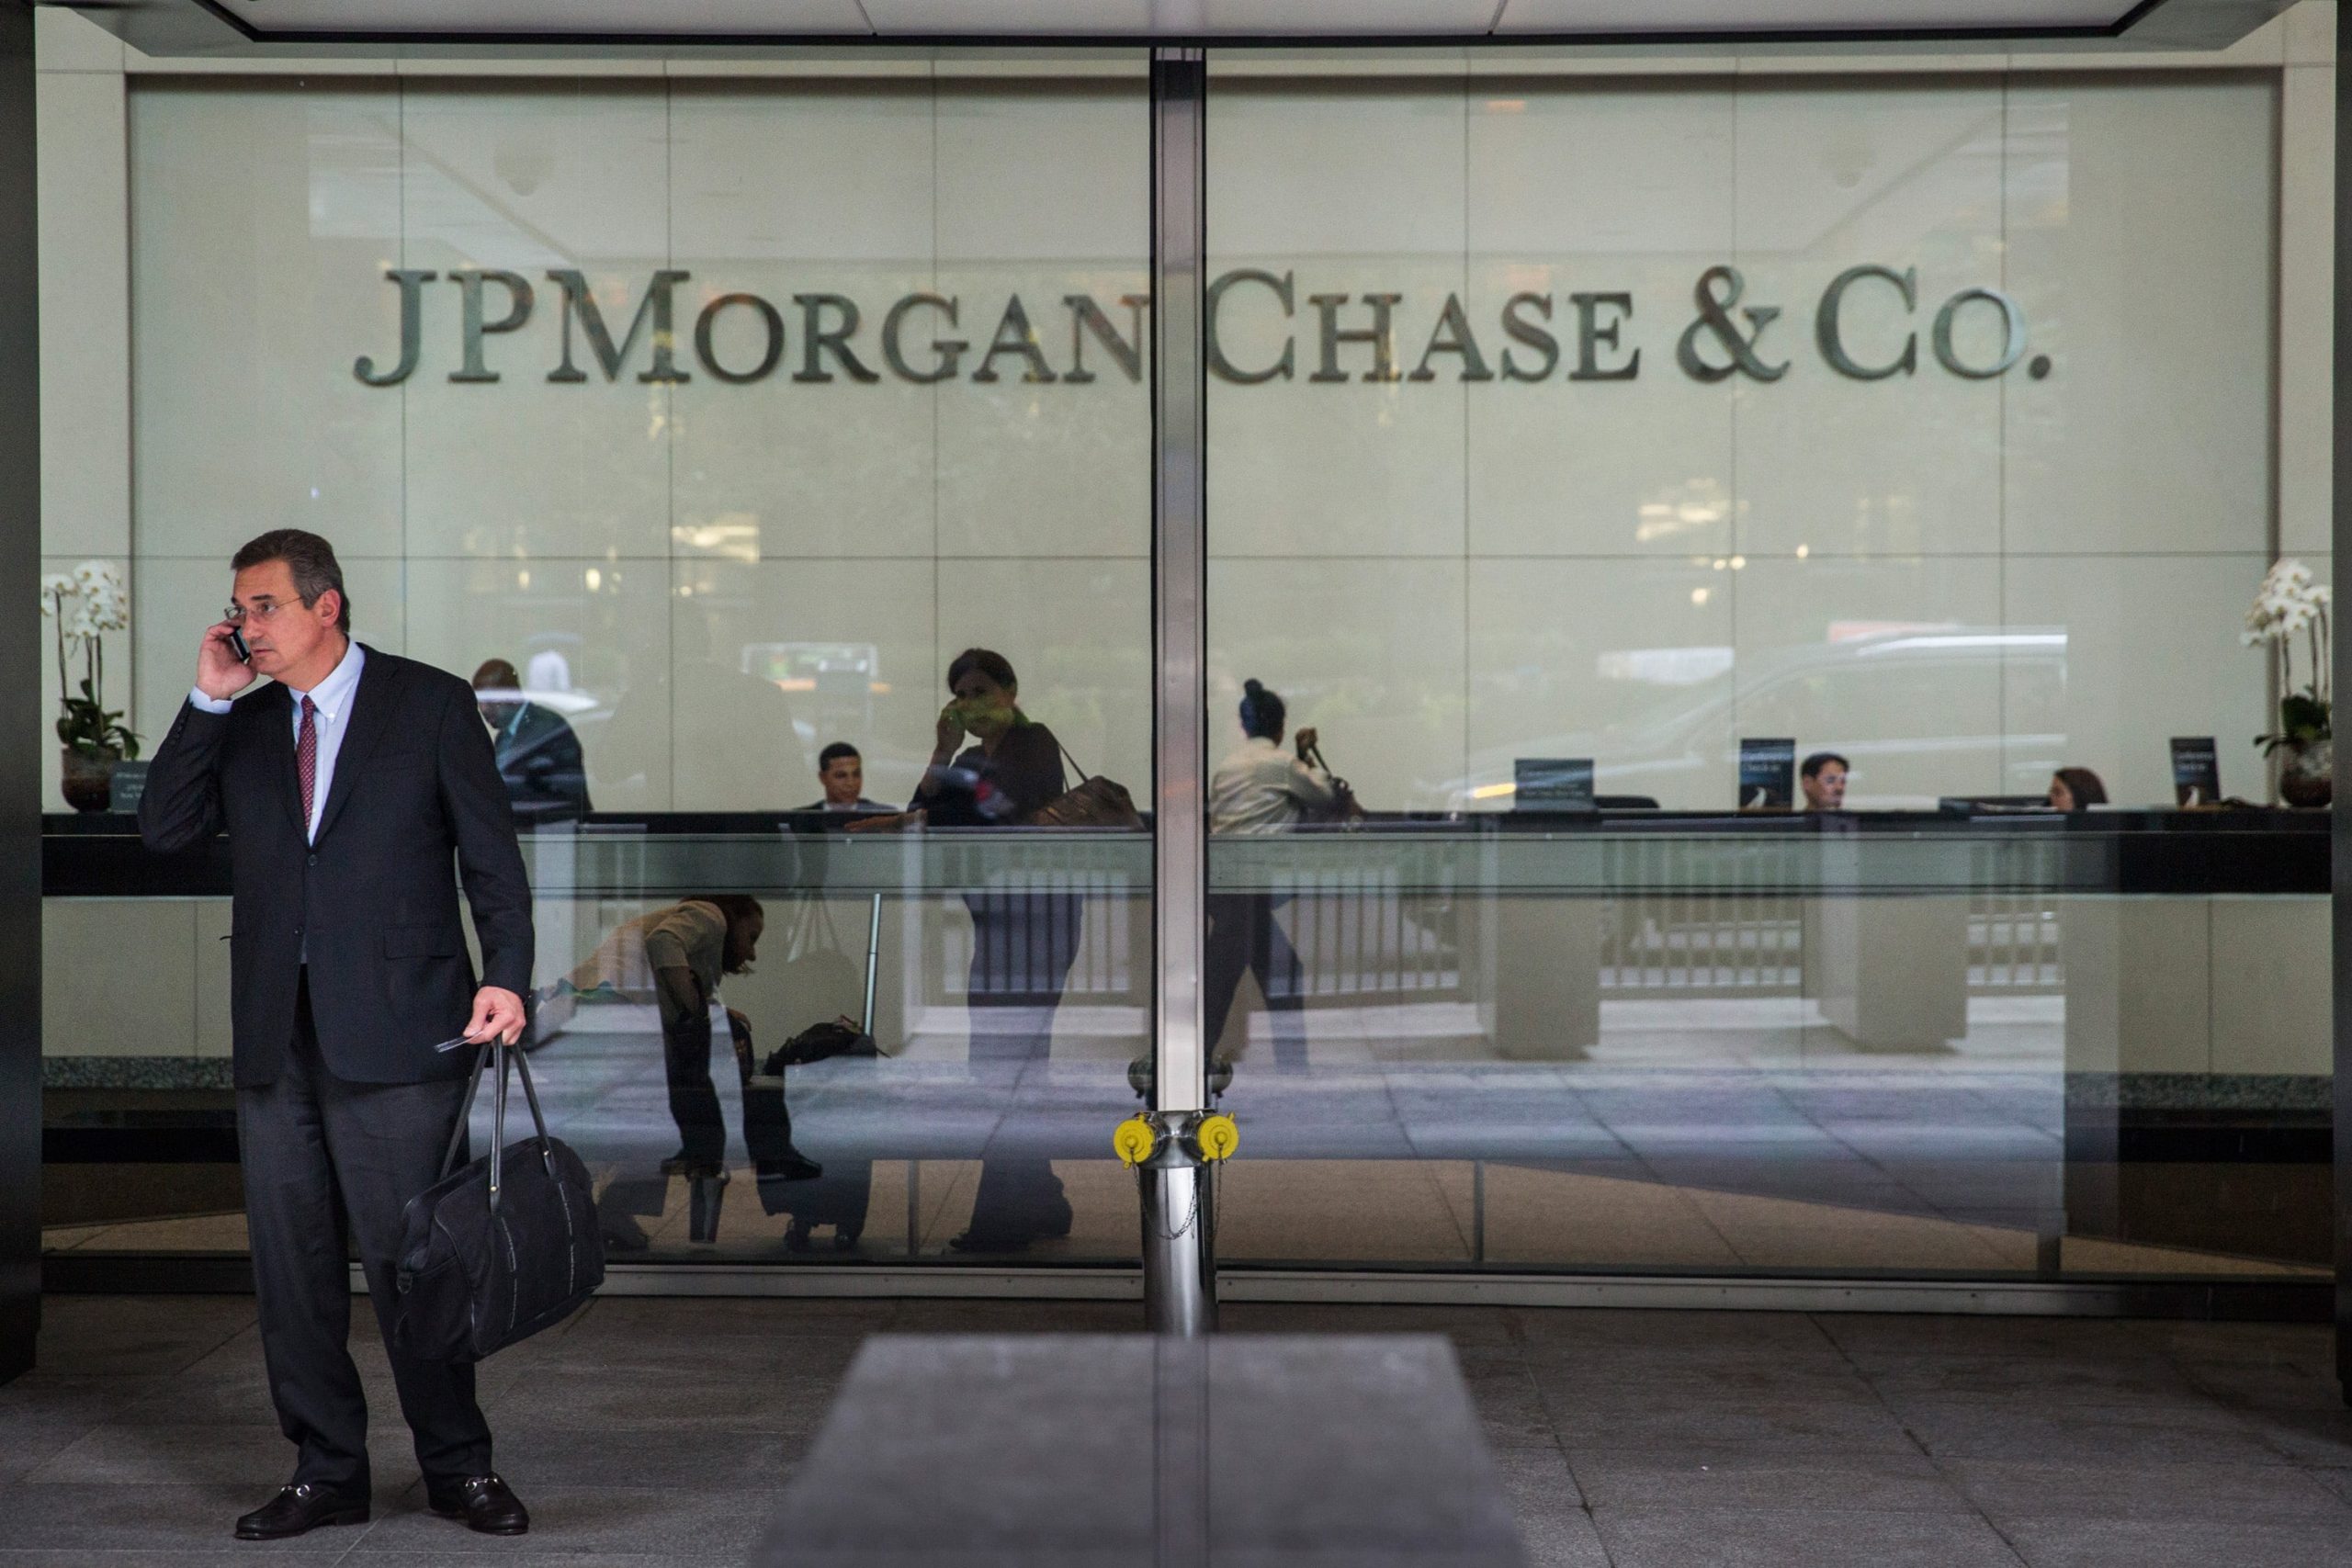 JP Morgan downgraded by KBW: 'Estimates can not assist present valuation'